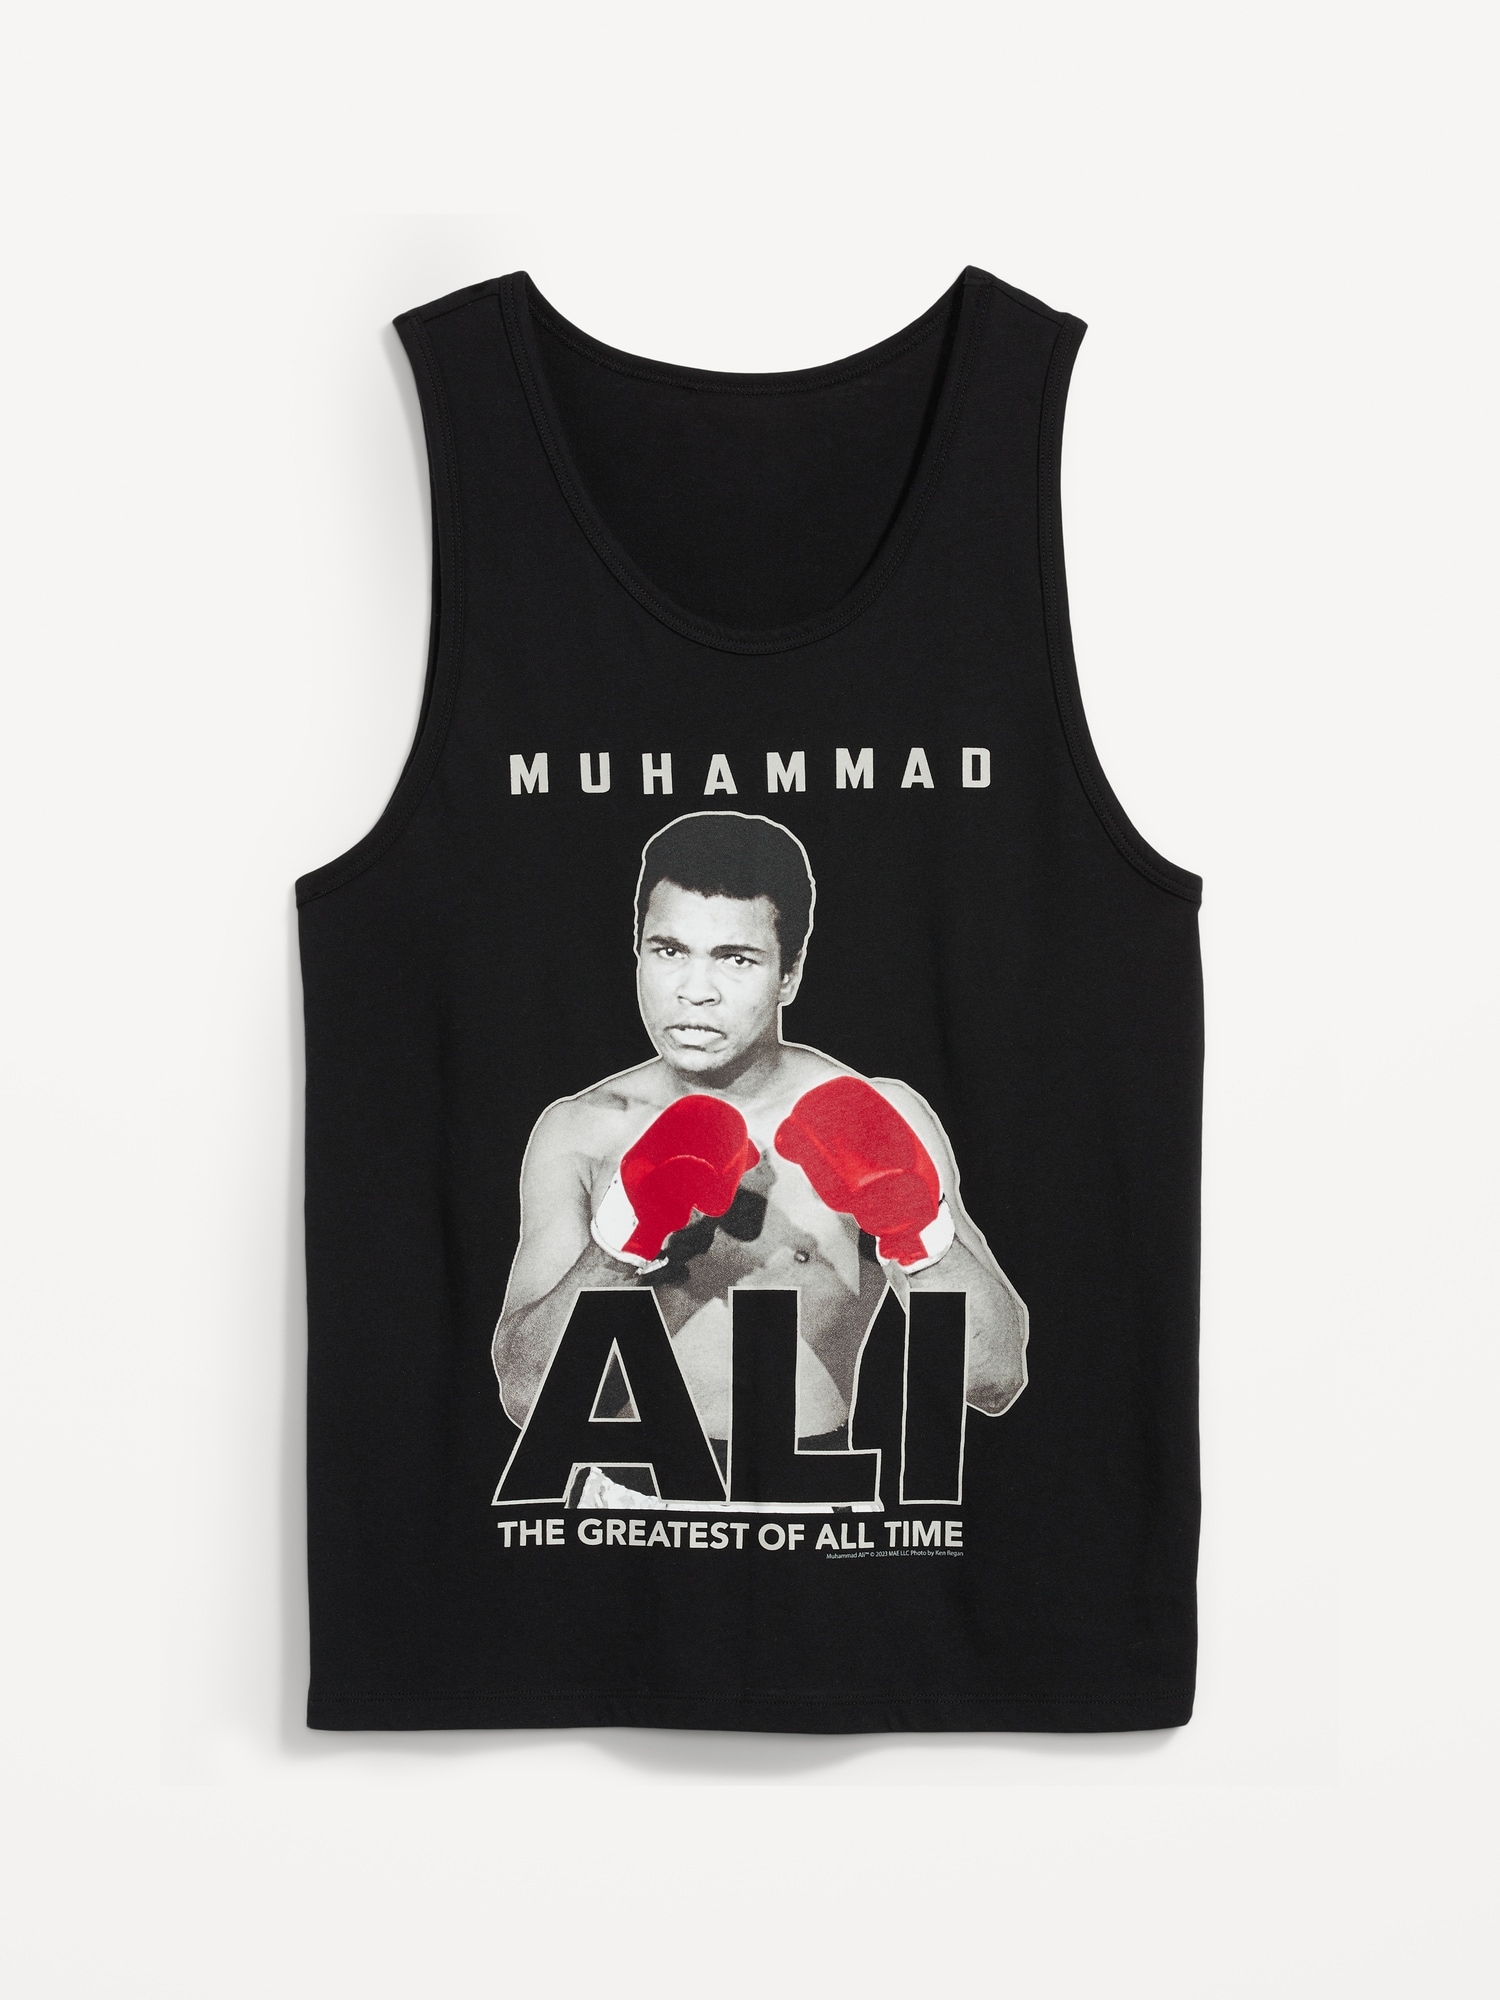 Old Navy Muhammad Ali™ "The Greatest of All Time" Gender-Neutral Tank Top for Adults black. 1